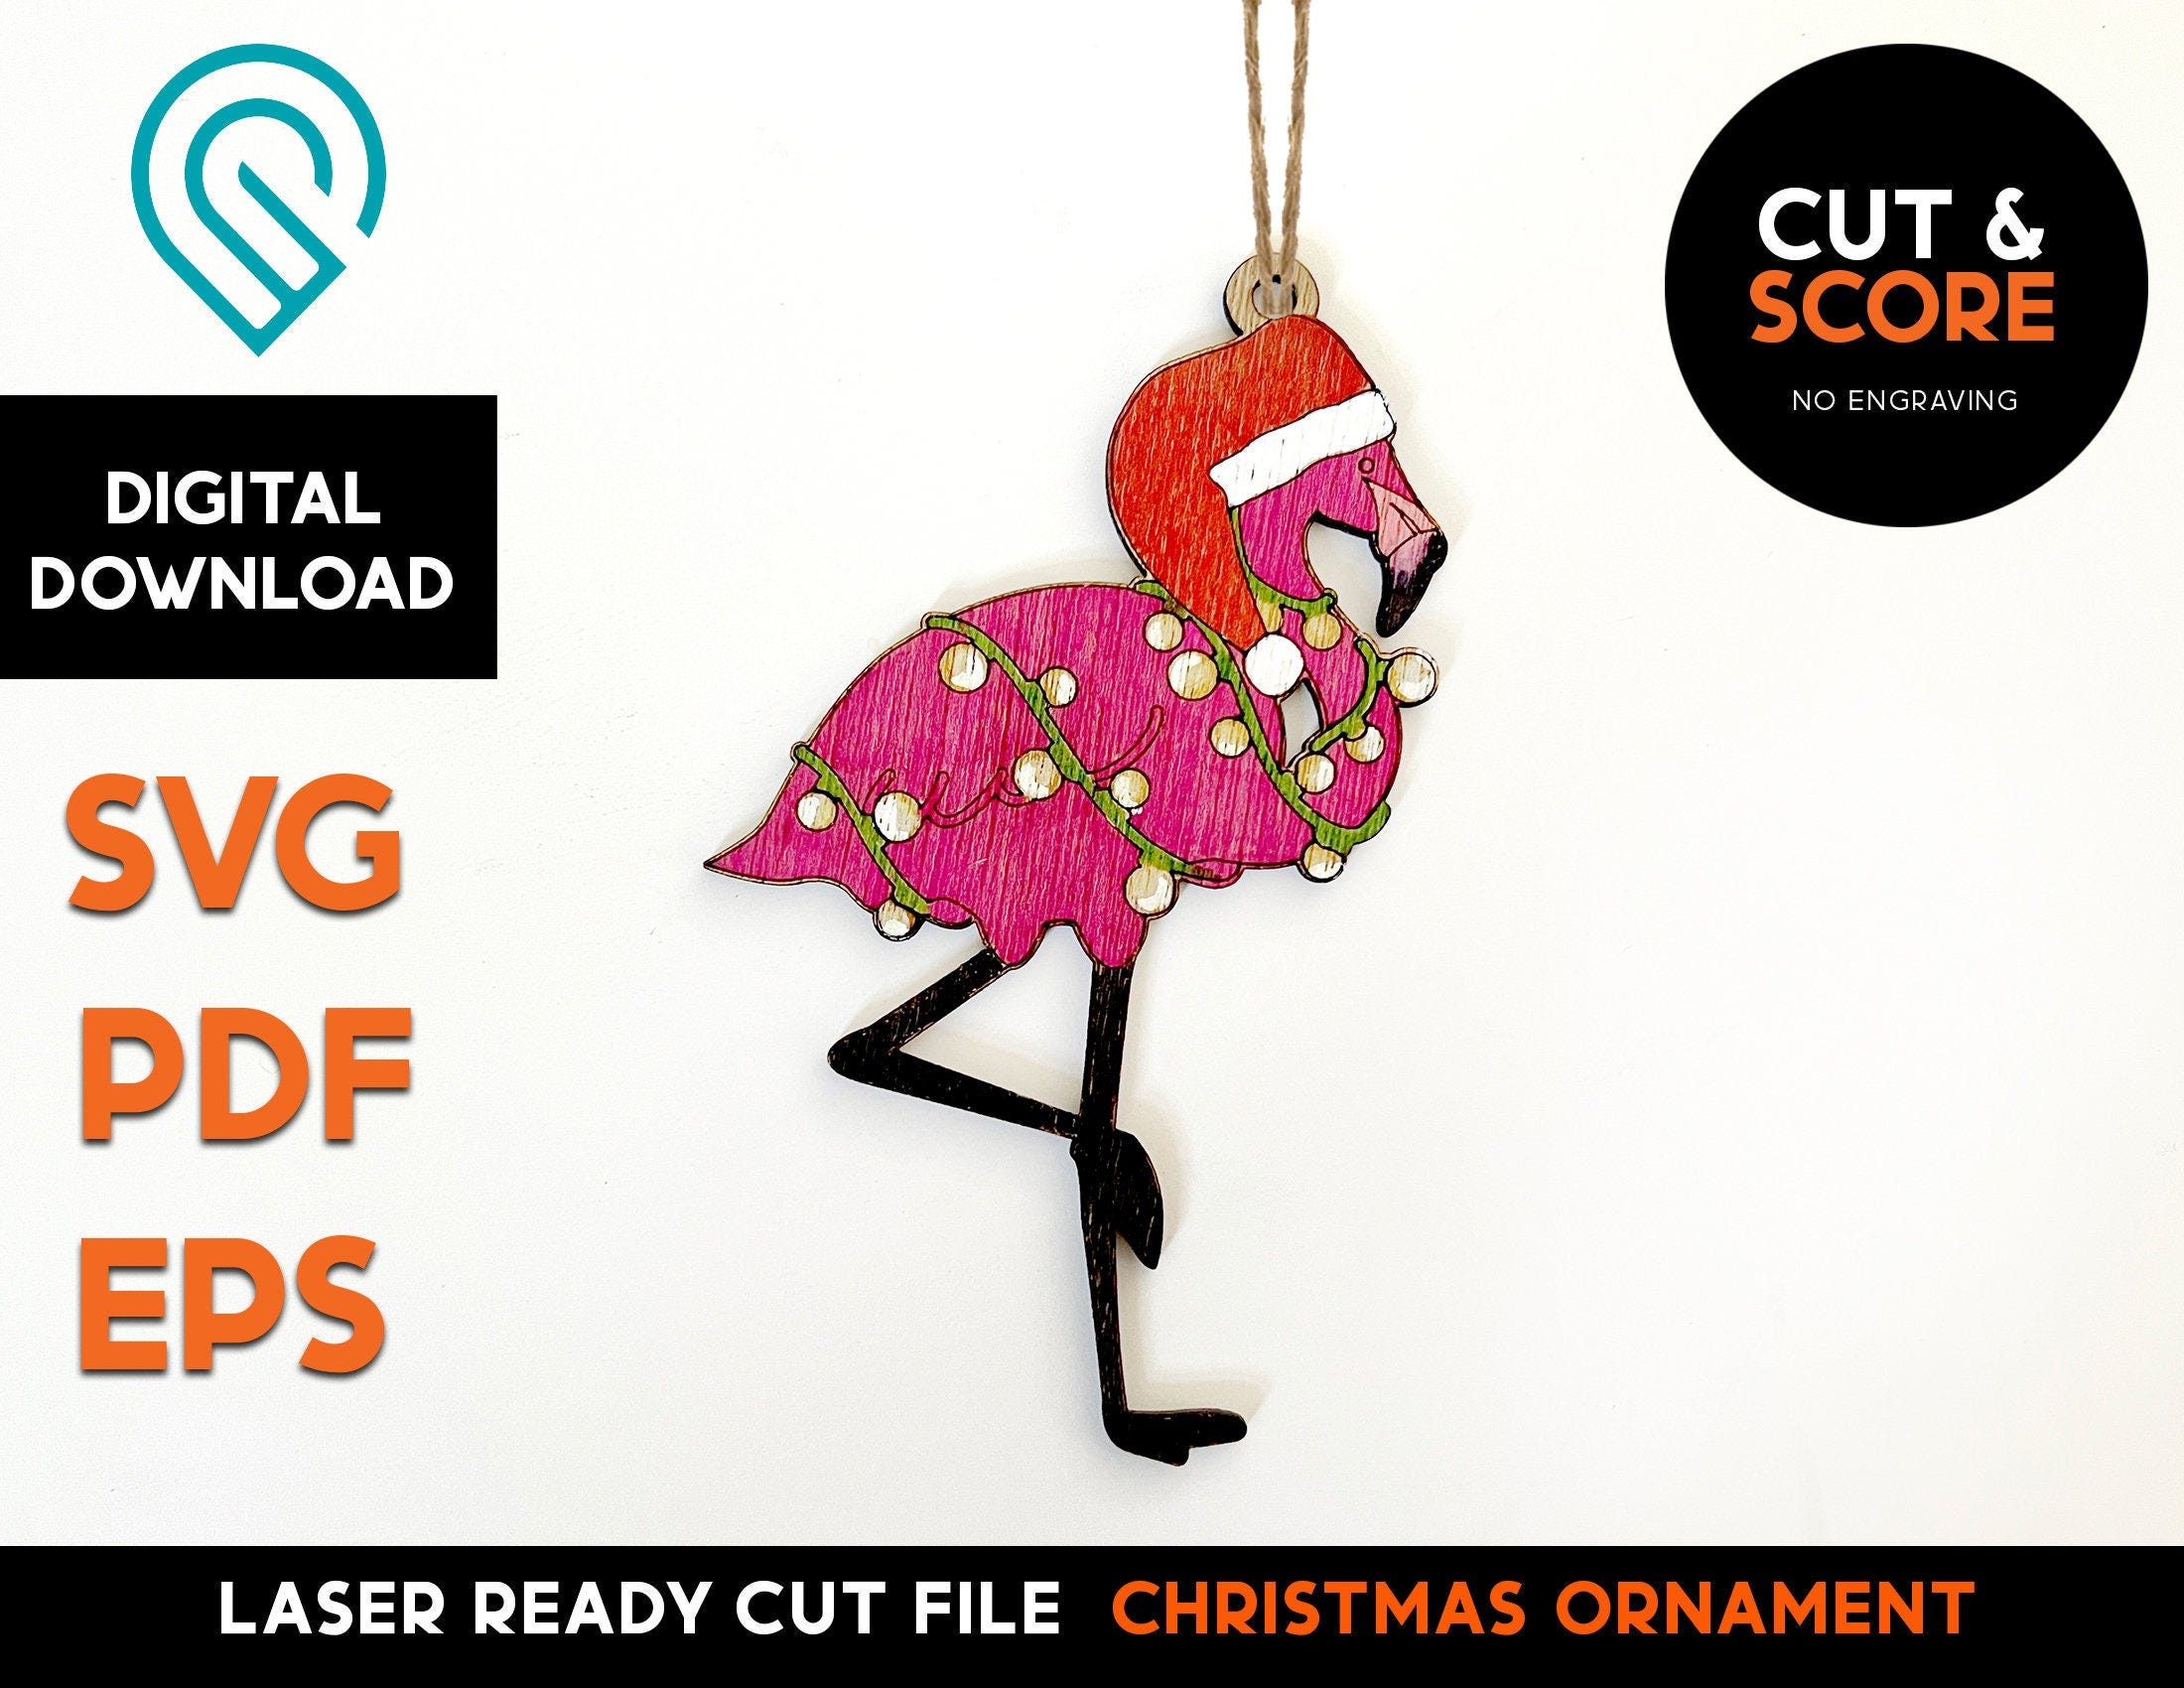 Flamingo Christmas Ornament - Laser Cut SVG File - Glowforge Ready and Tested - Cut and Score - Warm Winter, Lights